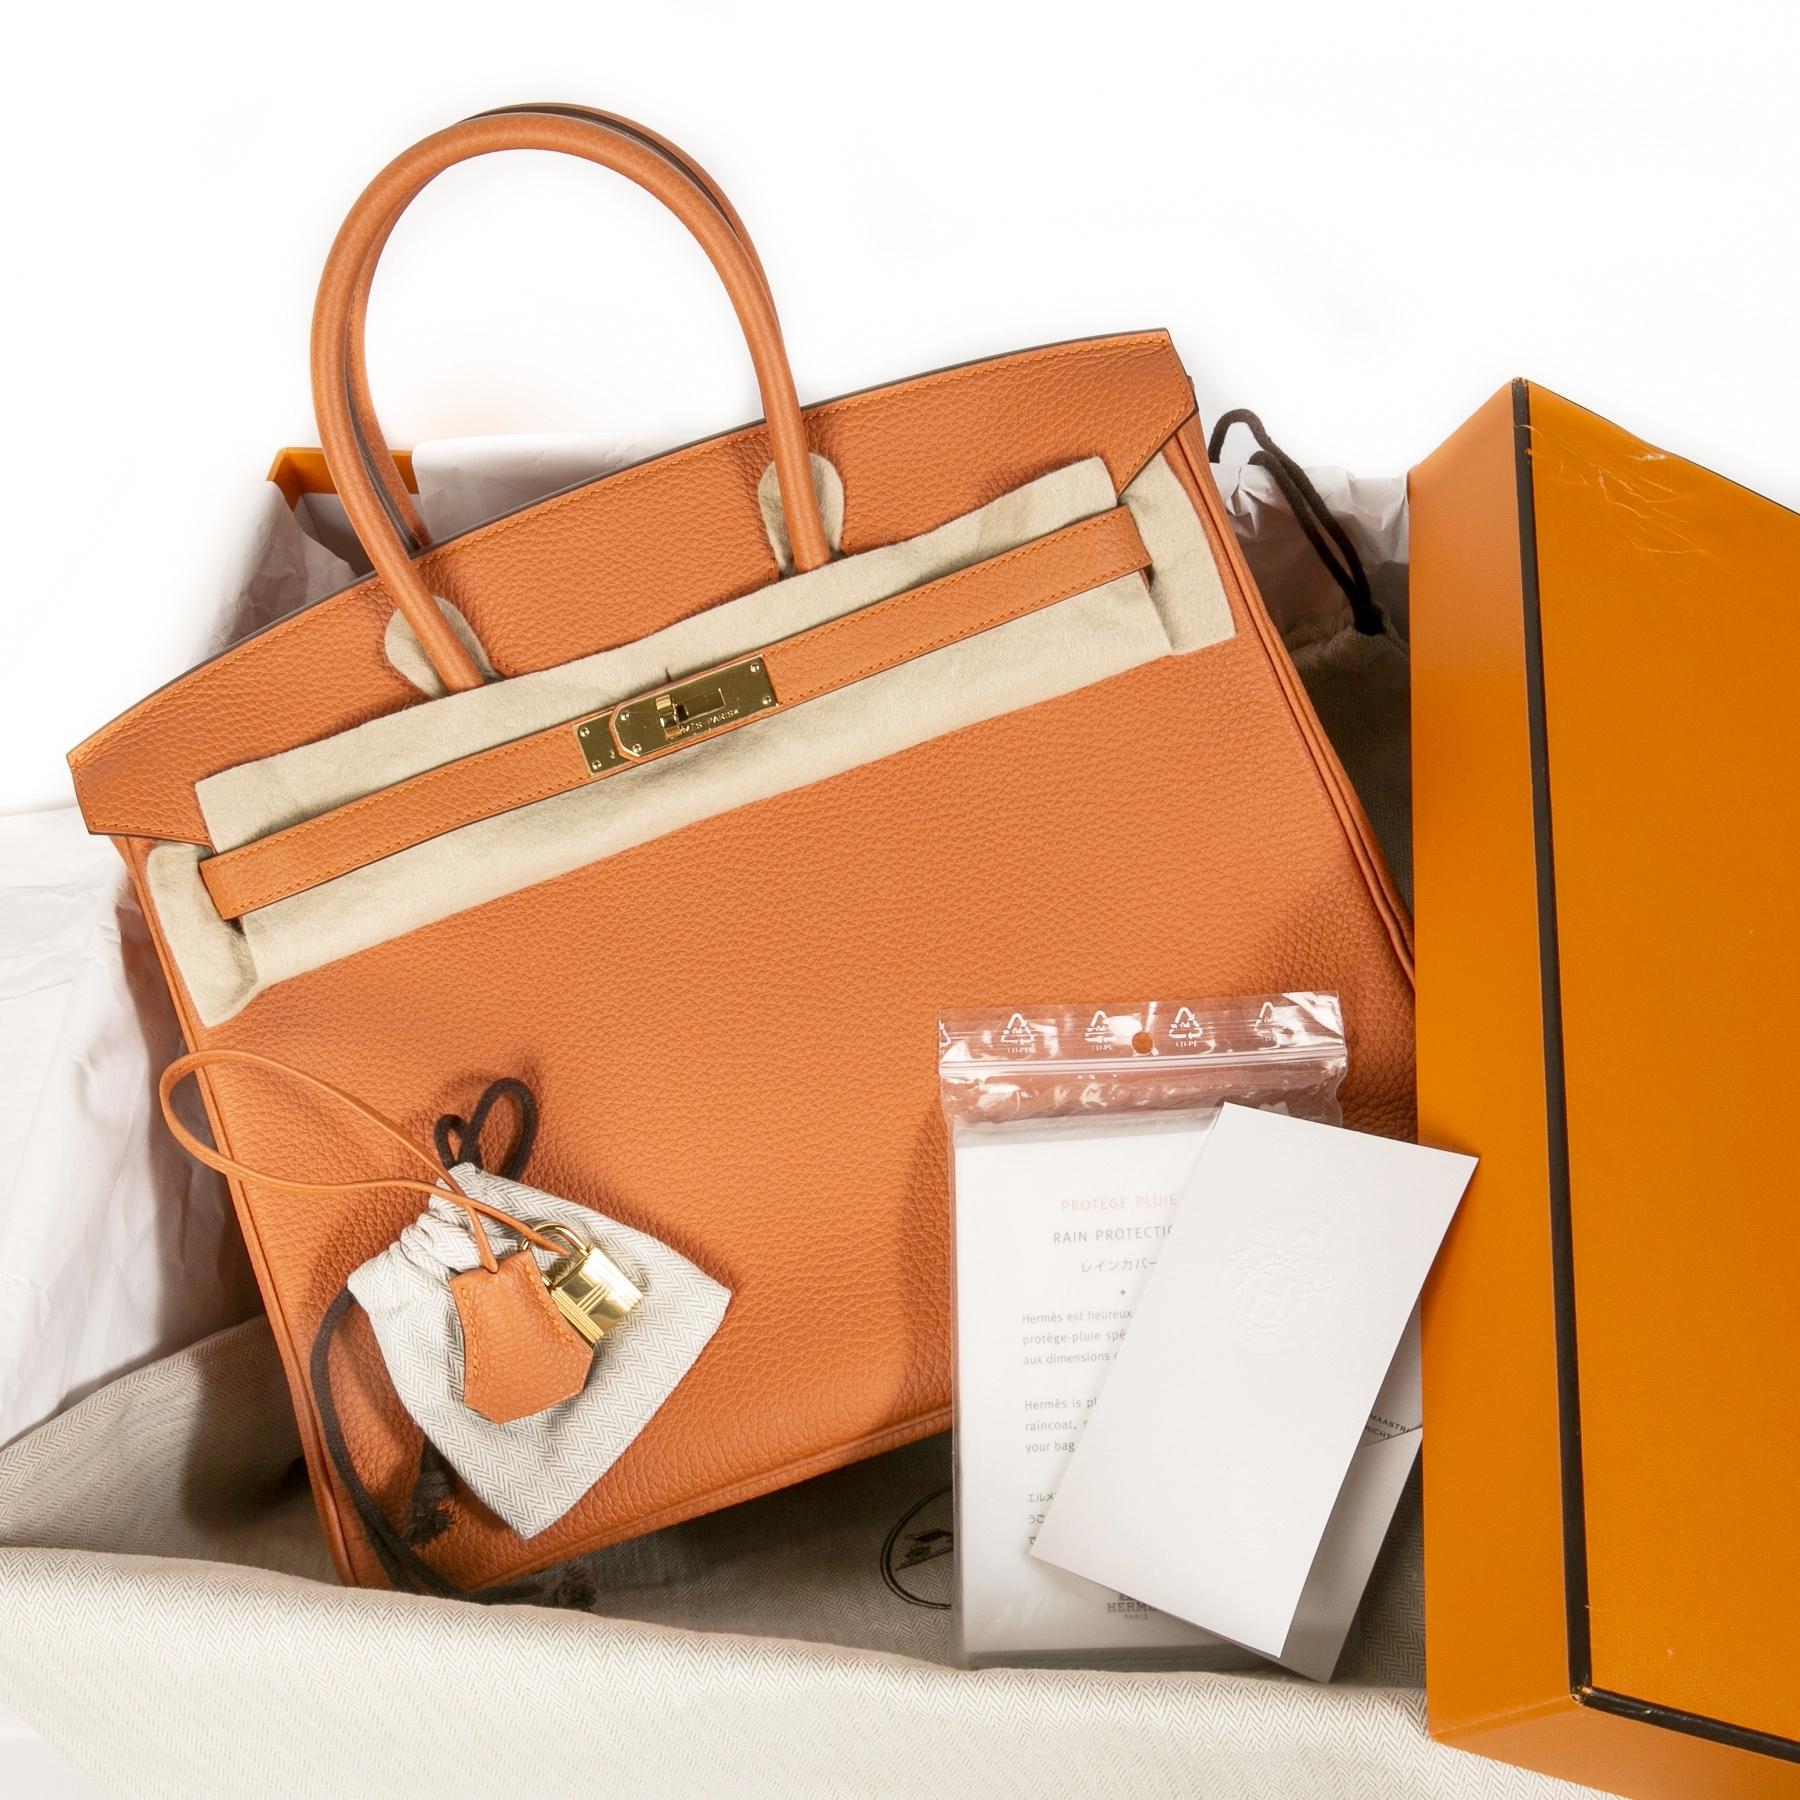 There is no Birkin more iconic than this Hermès Birkin 35 Orange Togo GHW.

From the leather - Togo is crafted out of baby calf and features a distinctive yet soft pebbled structure-,  over the color - Orange d'Hermès is known all over the world! -,